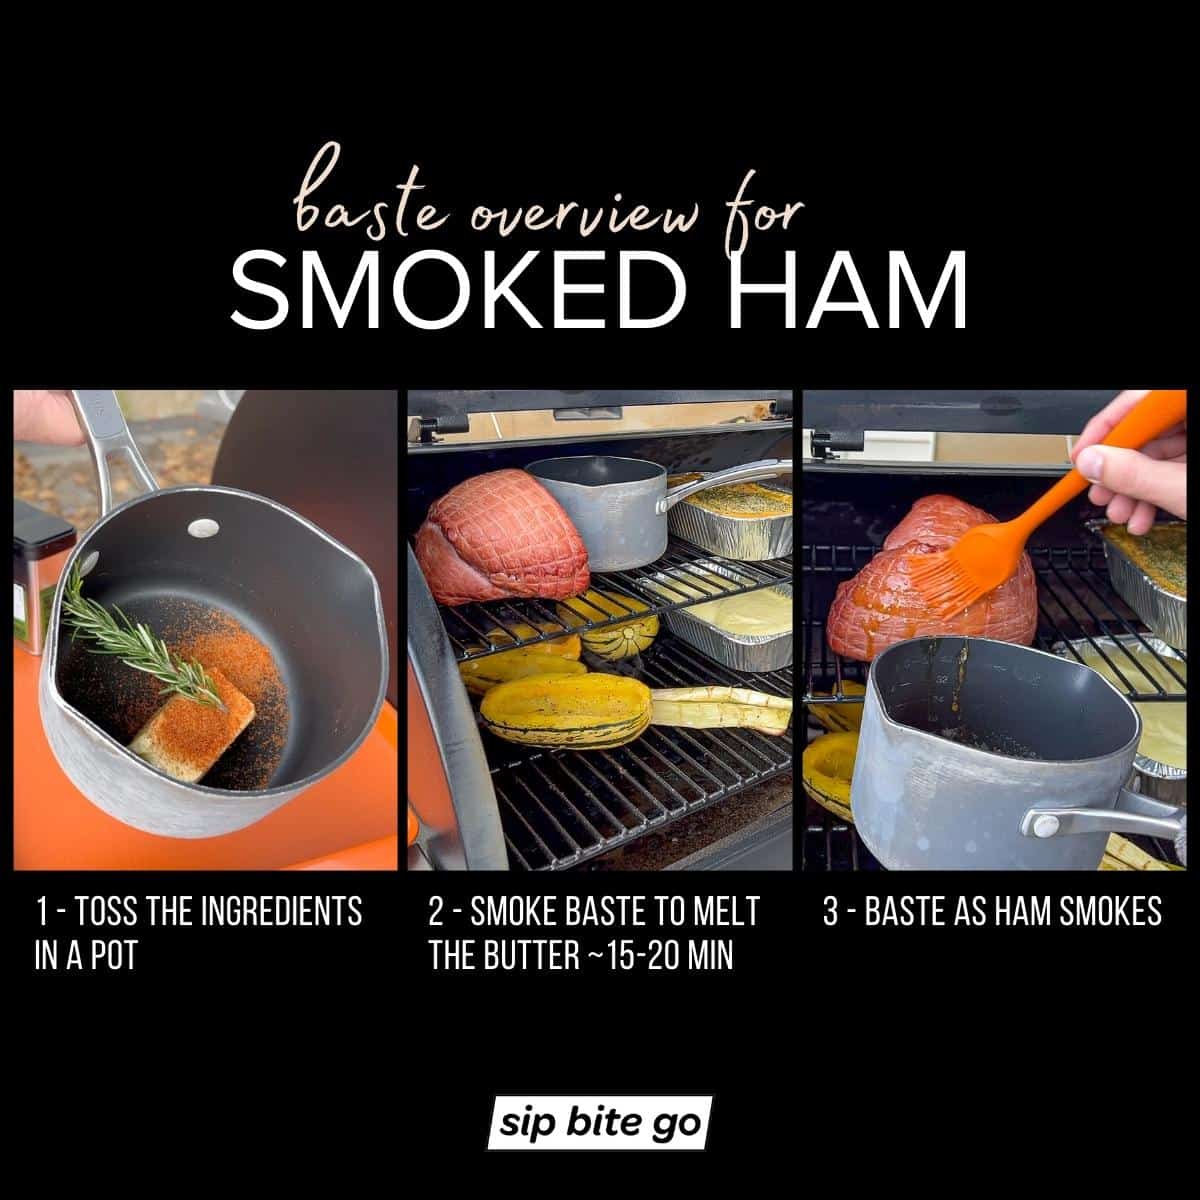 infographic demonstrating how to make and use smoked ham baste